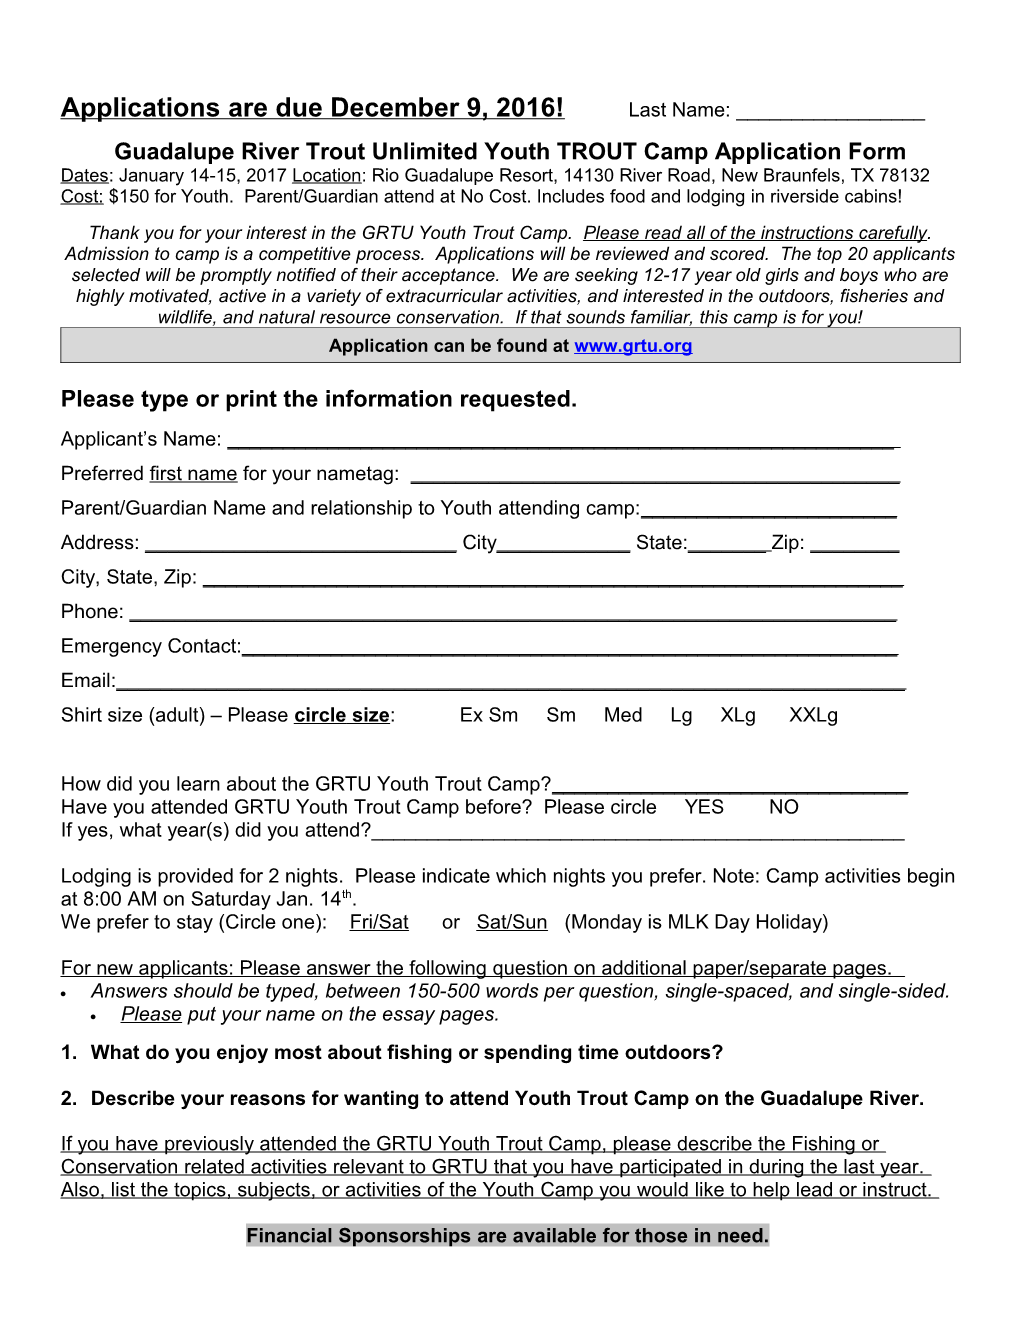 Applications Are Due April 1, 2005